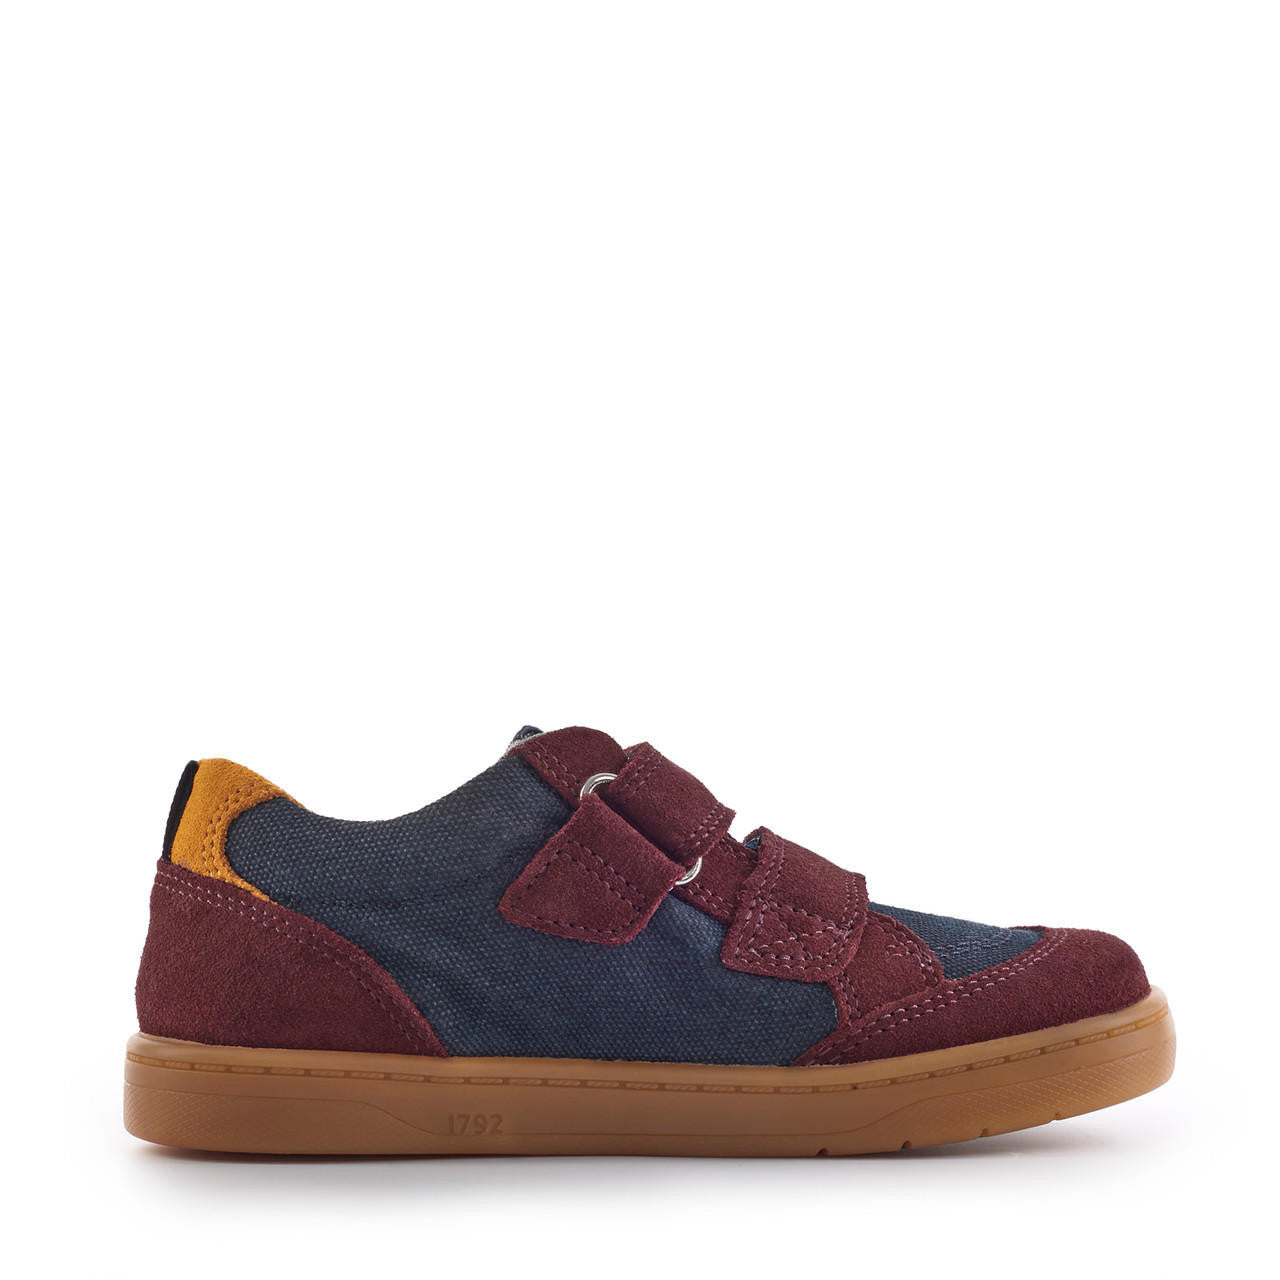 A boys casual shoe by Start-Rite, style is Enigma in wine and navy suede and canvas with double velcro fastening. Left side view.r.